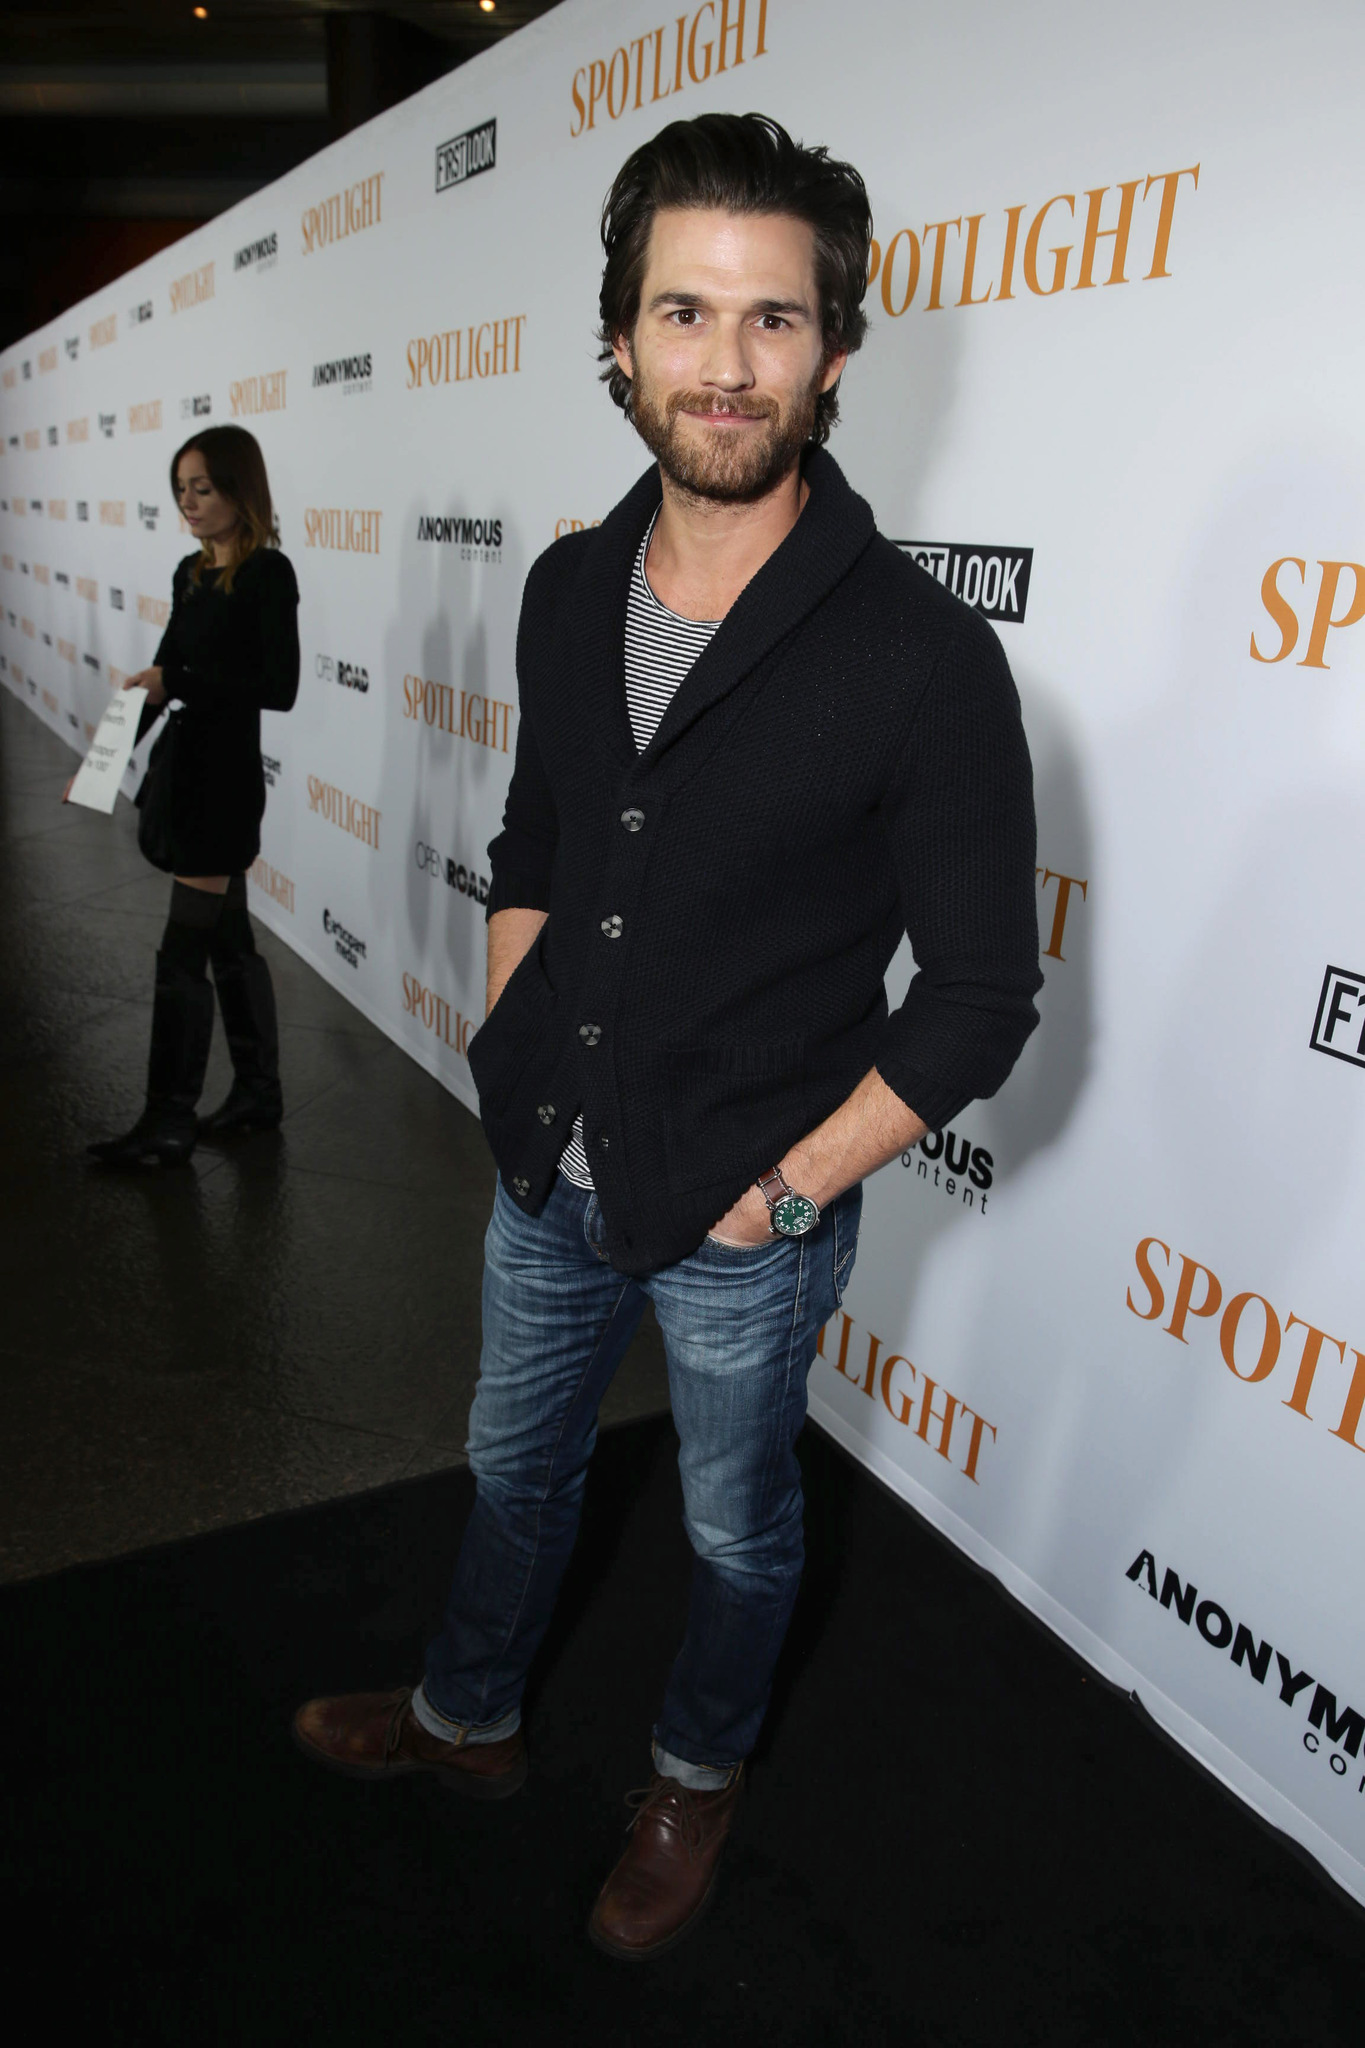 Johnny Whitworth at an event for Spotlight (2015)